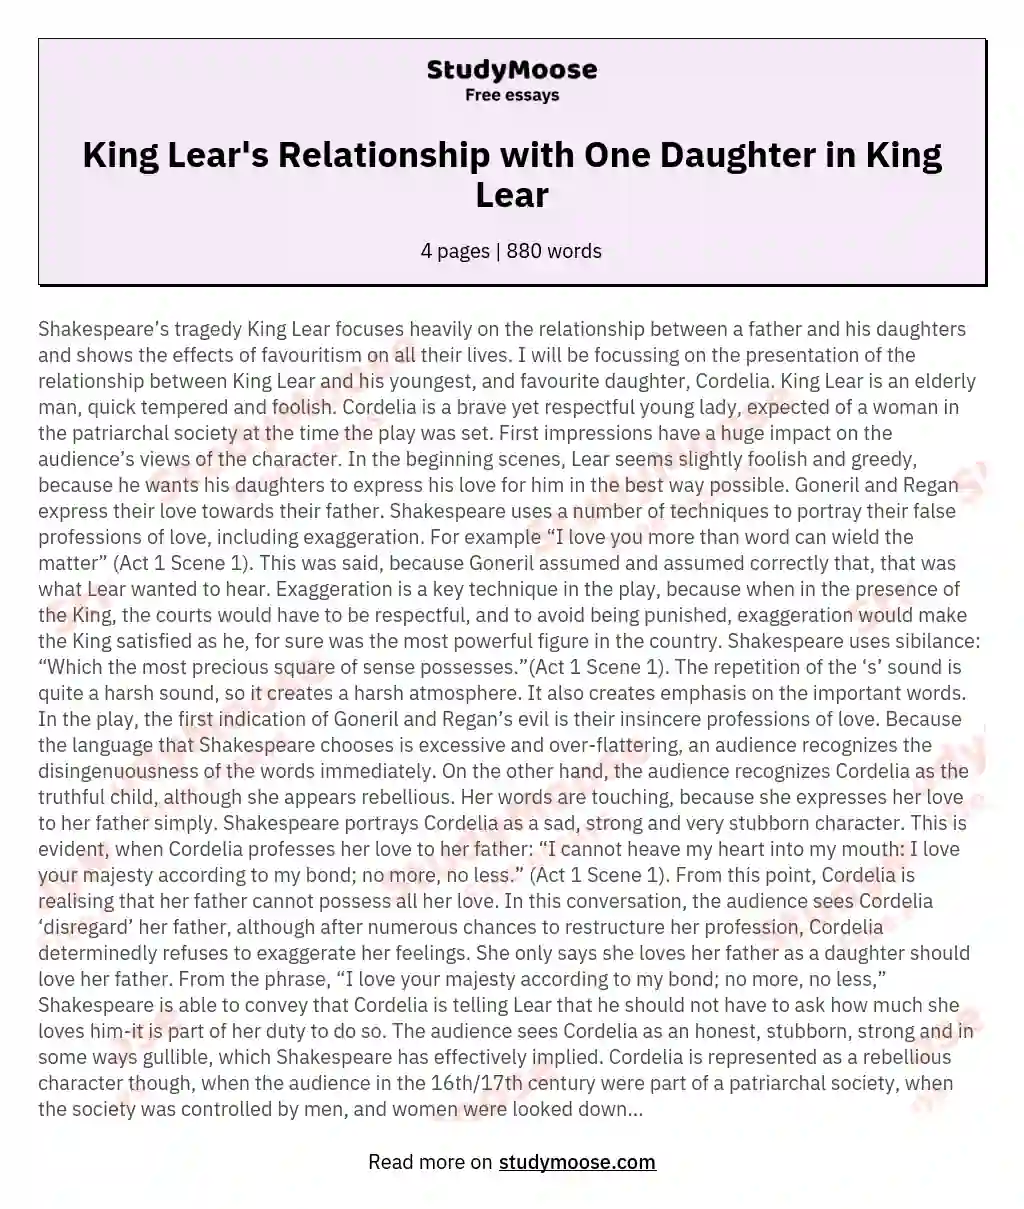 Examine the ways the relationship between King Lear and ONE of his daughters is presented in the play ‘King Lear’